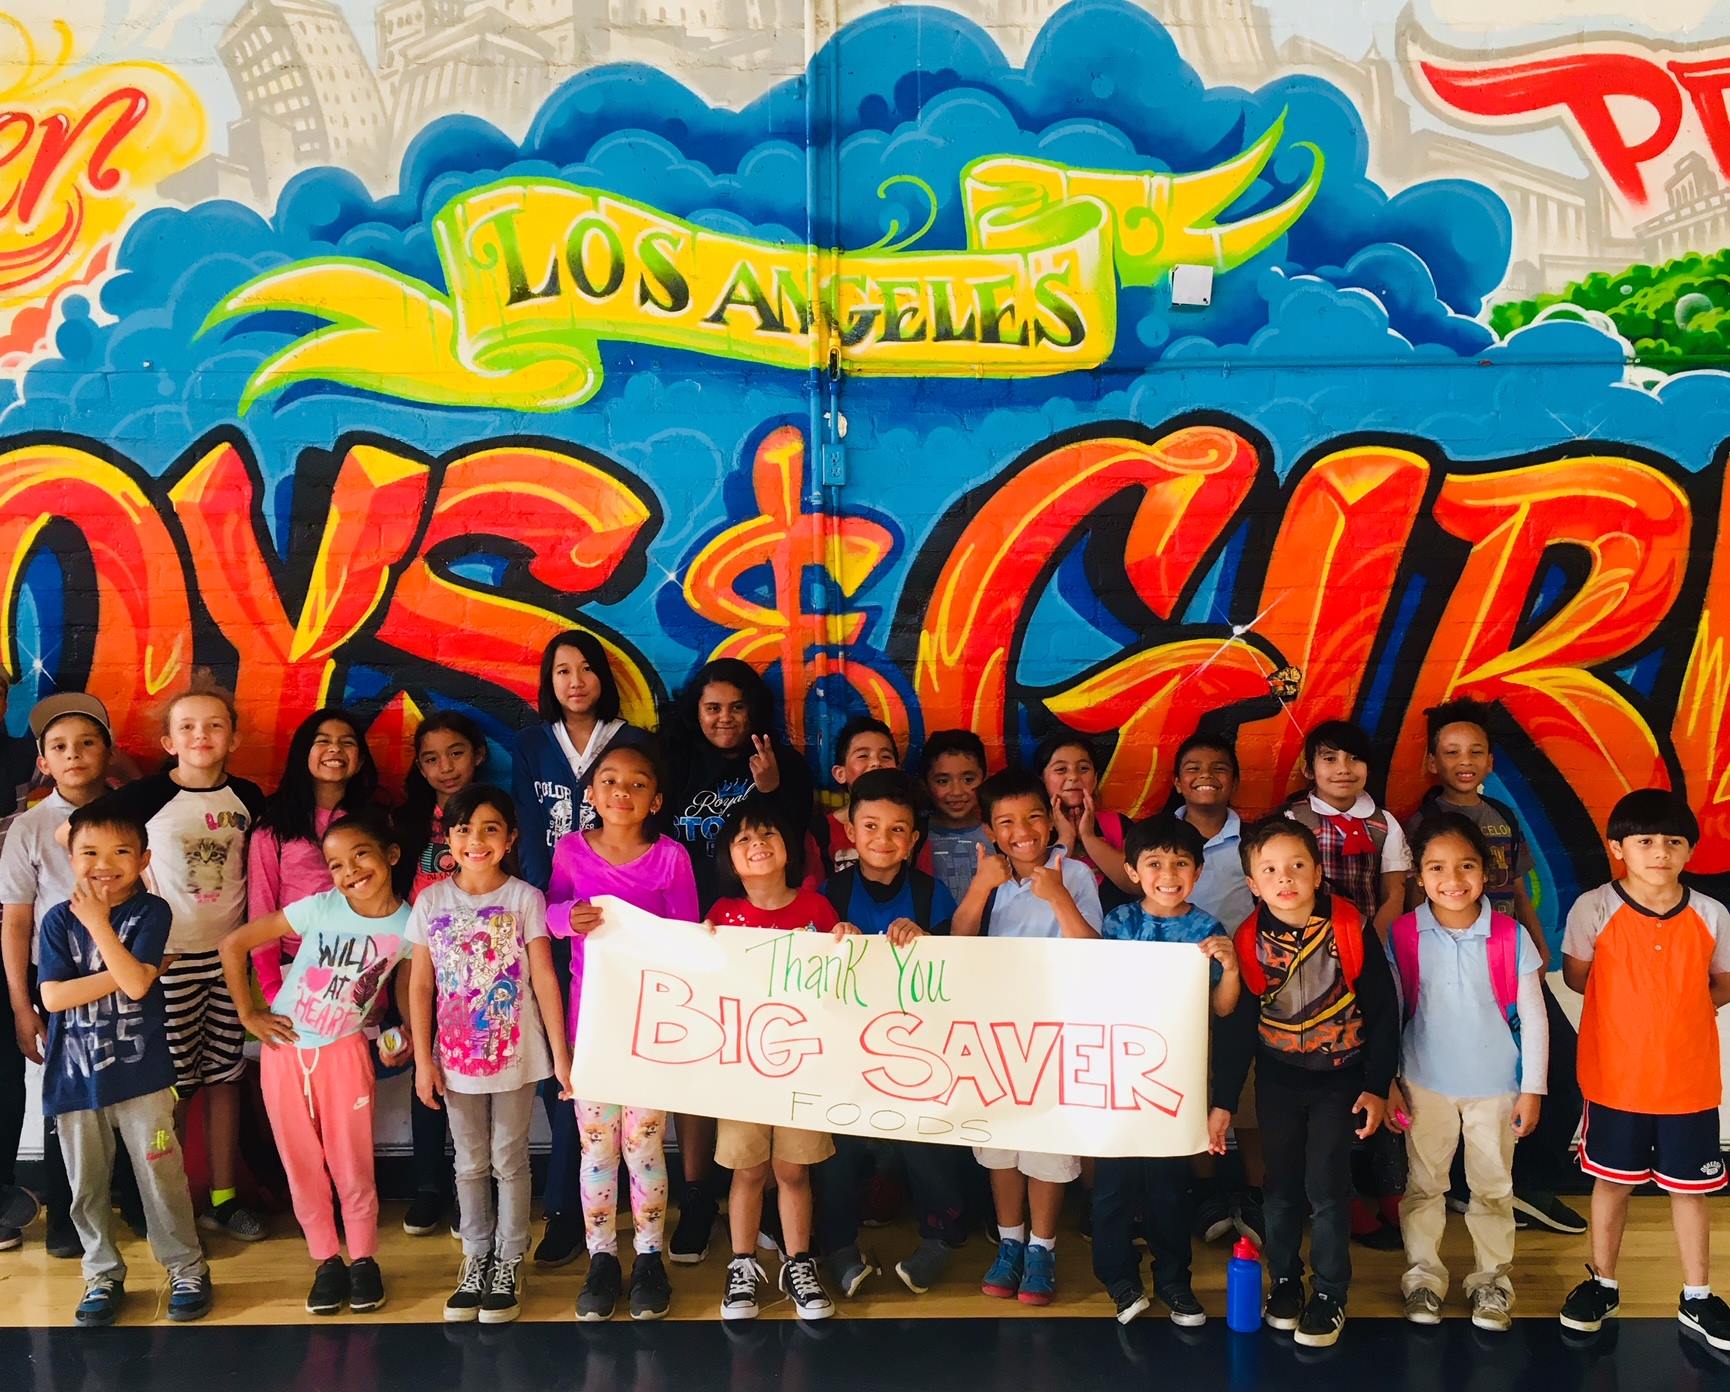 The Los Angeles Boys & Girls Club kids send a Big thank you to Big Saver Foods for being a part of the generous support within our community!